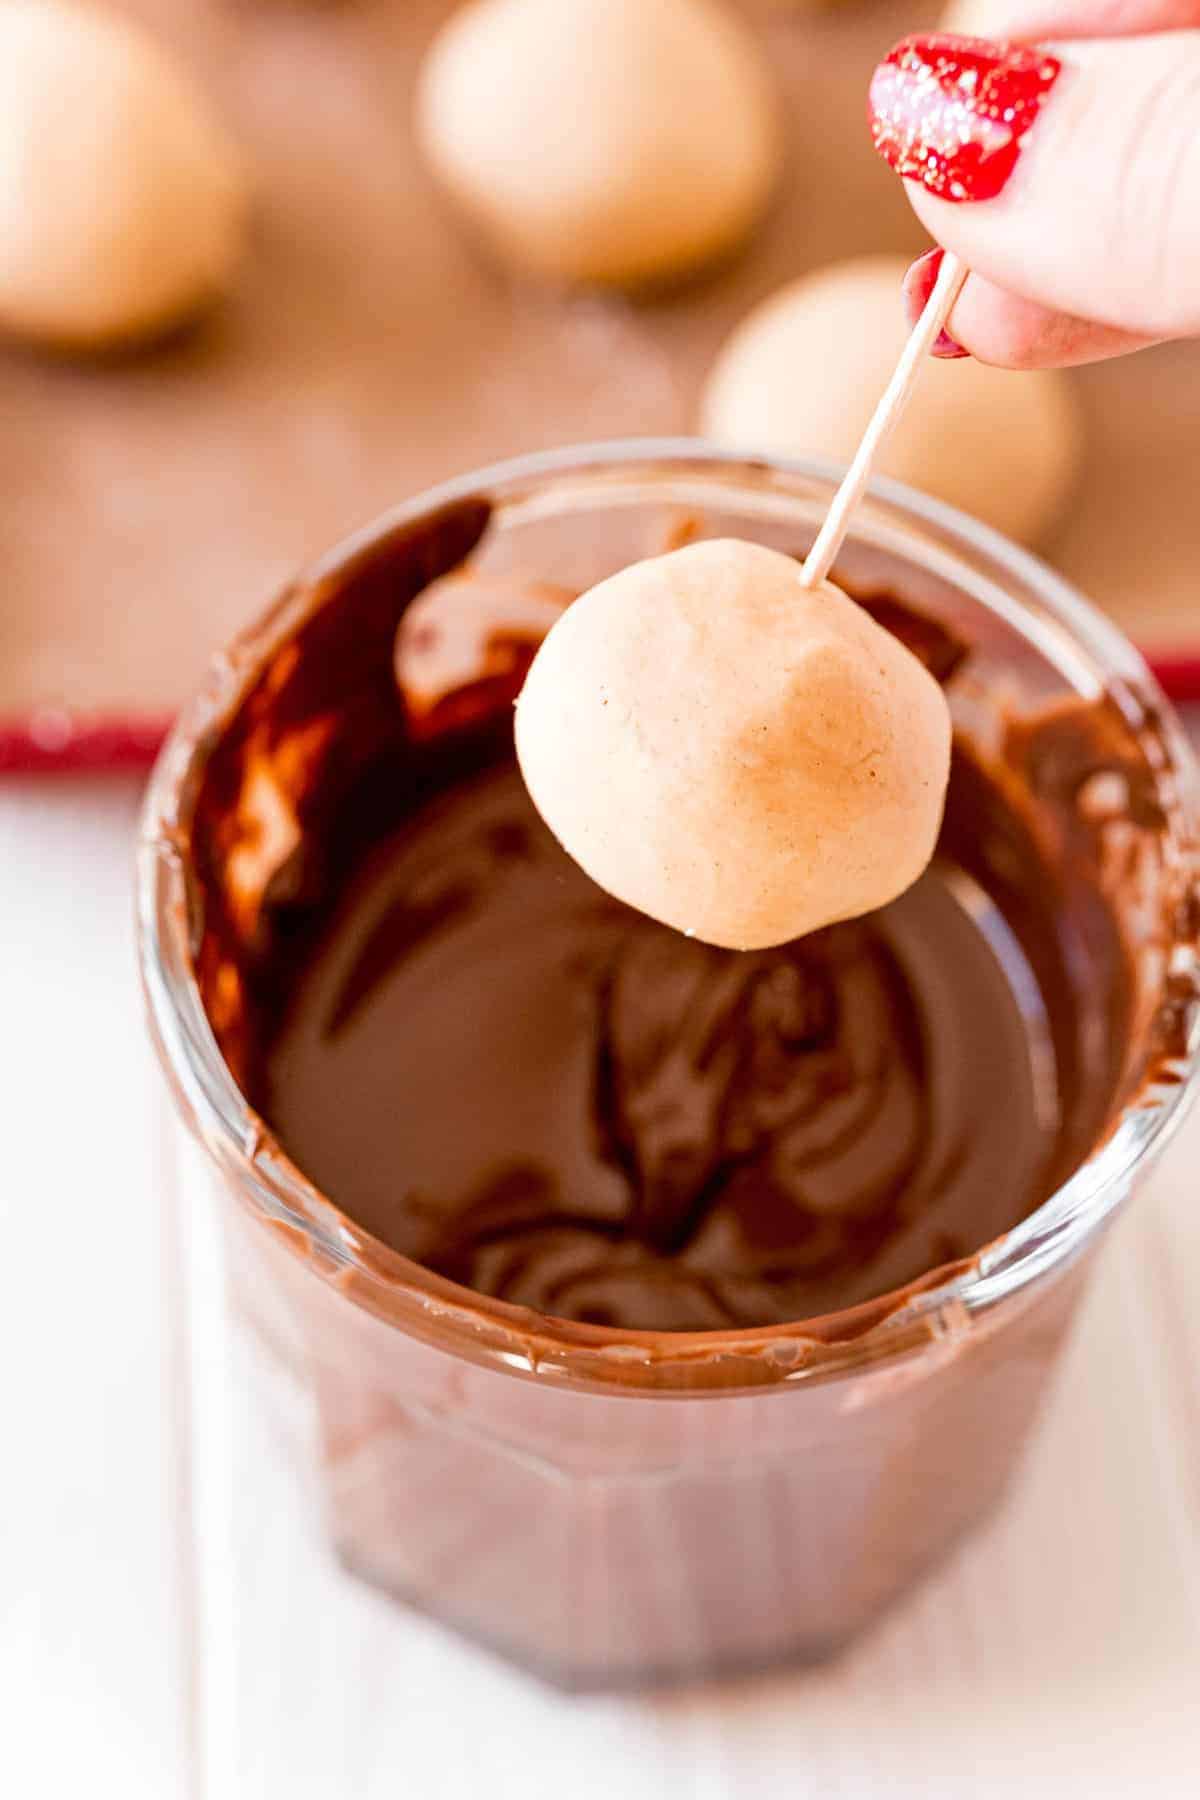 Peanut butter ball being dipped in chocolate.